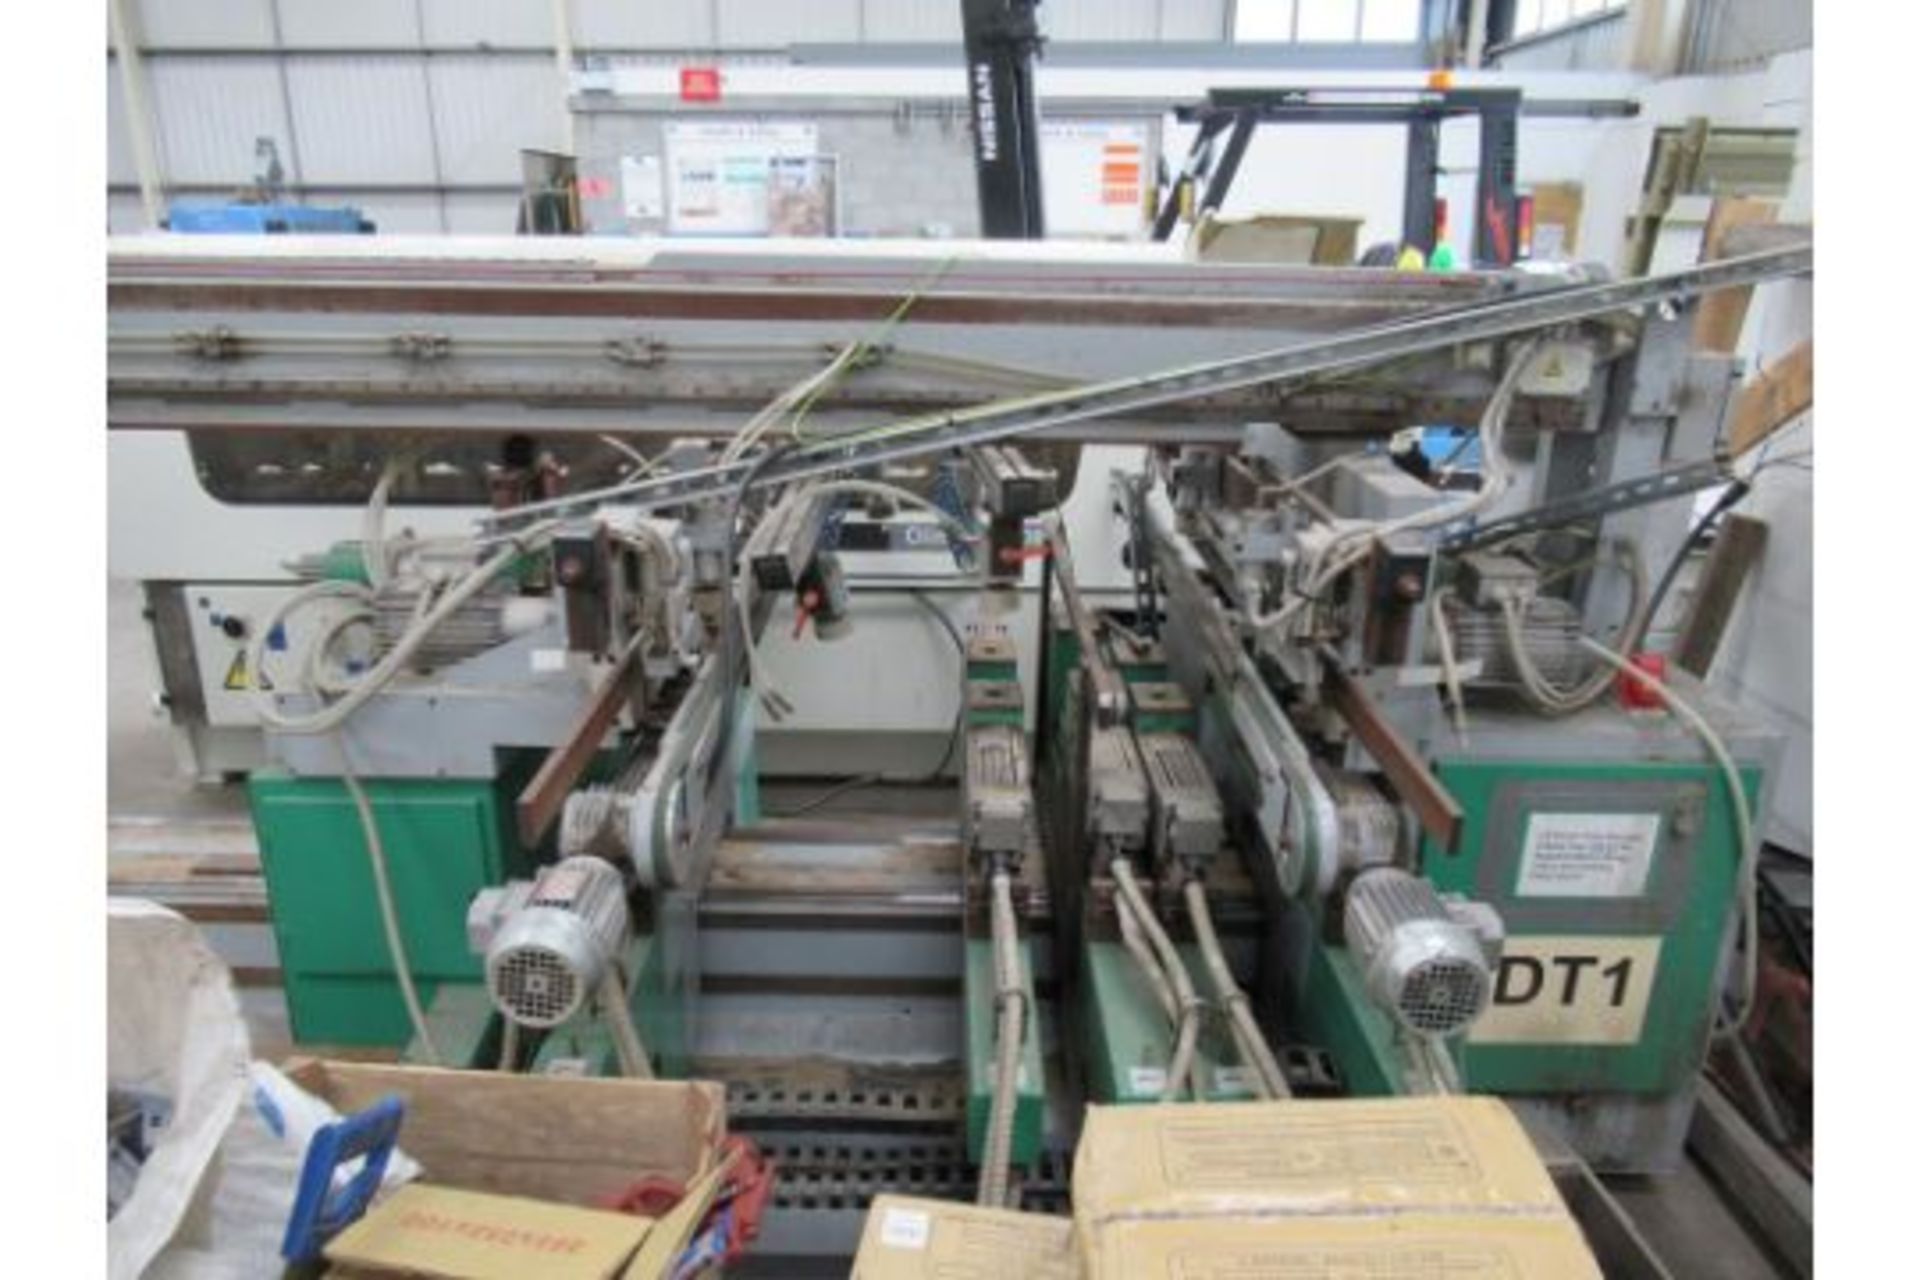 Detel KM 5-2-1 HP through feed drilling machine, weight 2600kg 3 phase, 50Hz, 380-415V, S/N 08-058-0 - Image 6 of 6